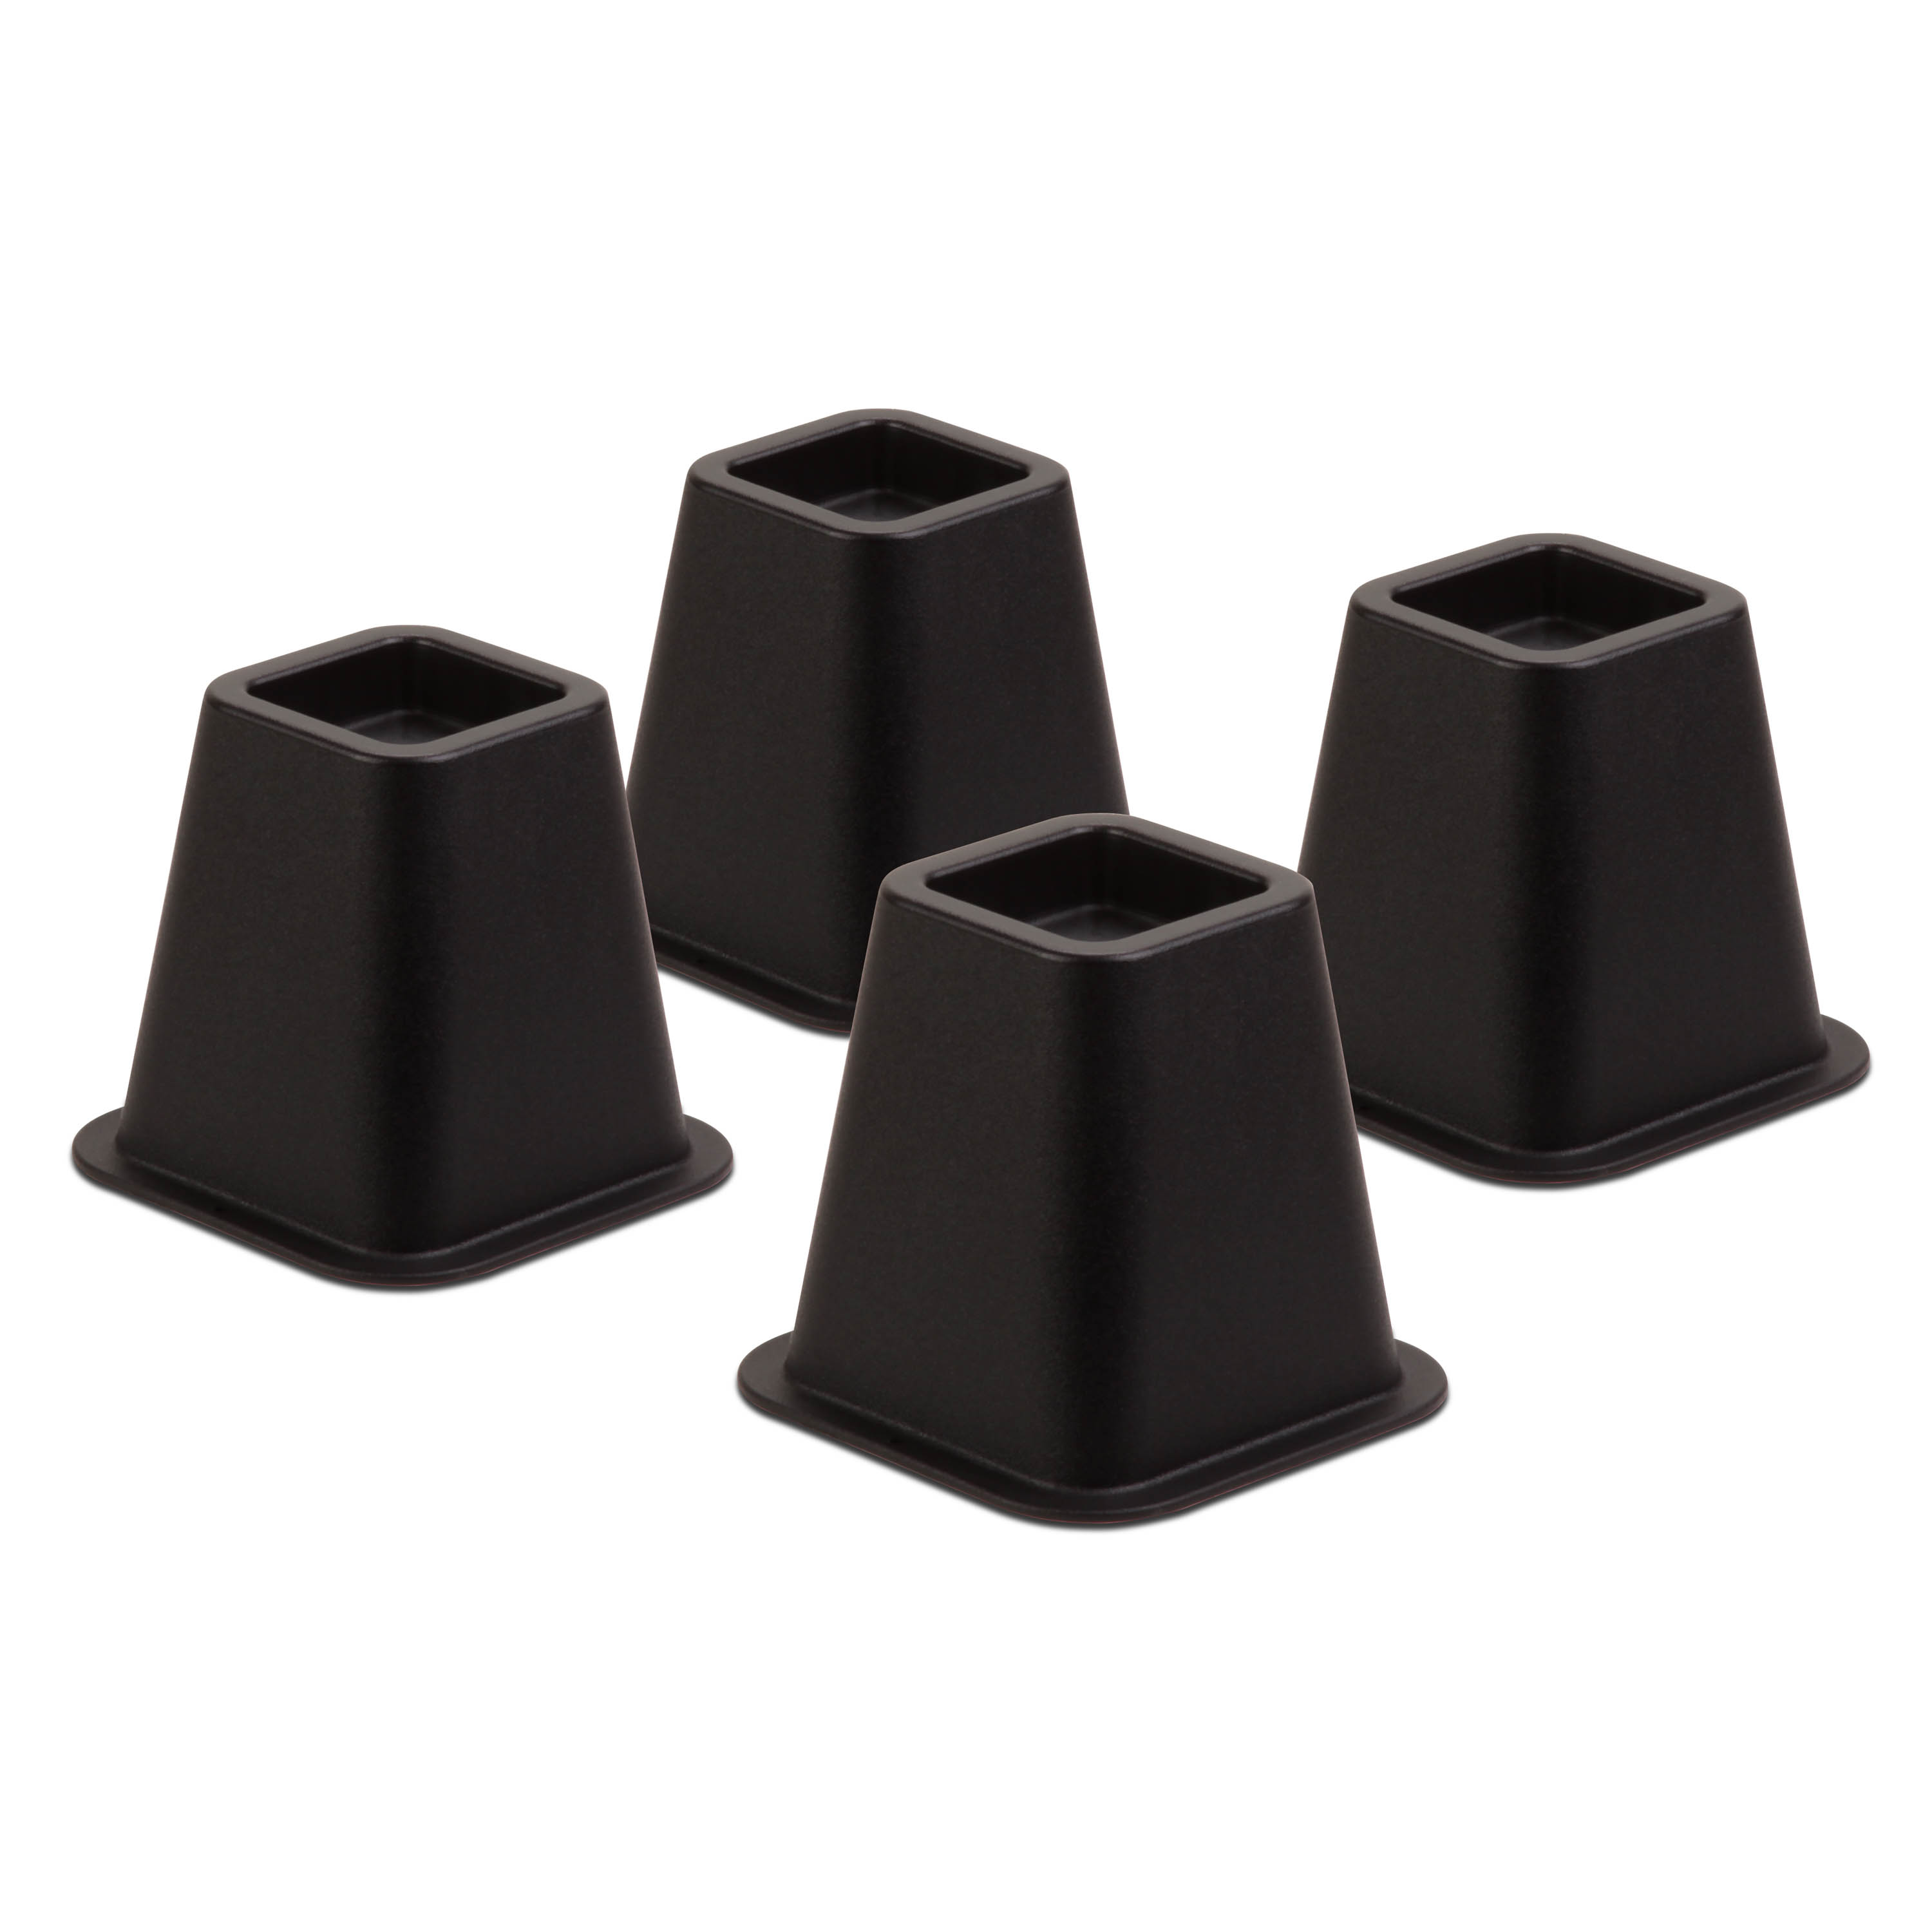 Honey-Can-Do Black Plastic 6" Bed Risers, Set of 4 - image 1 of 4